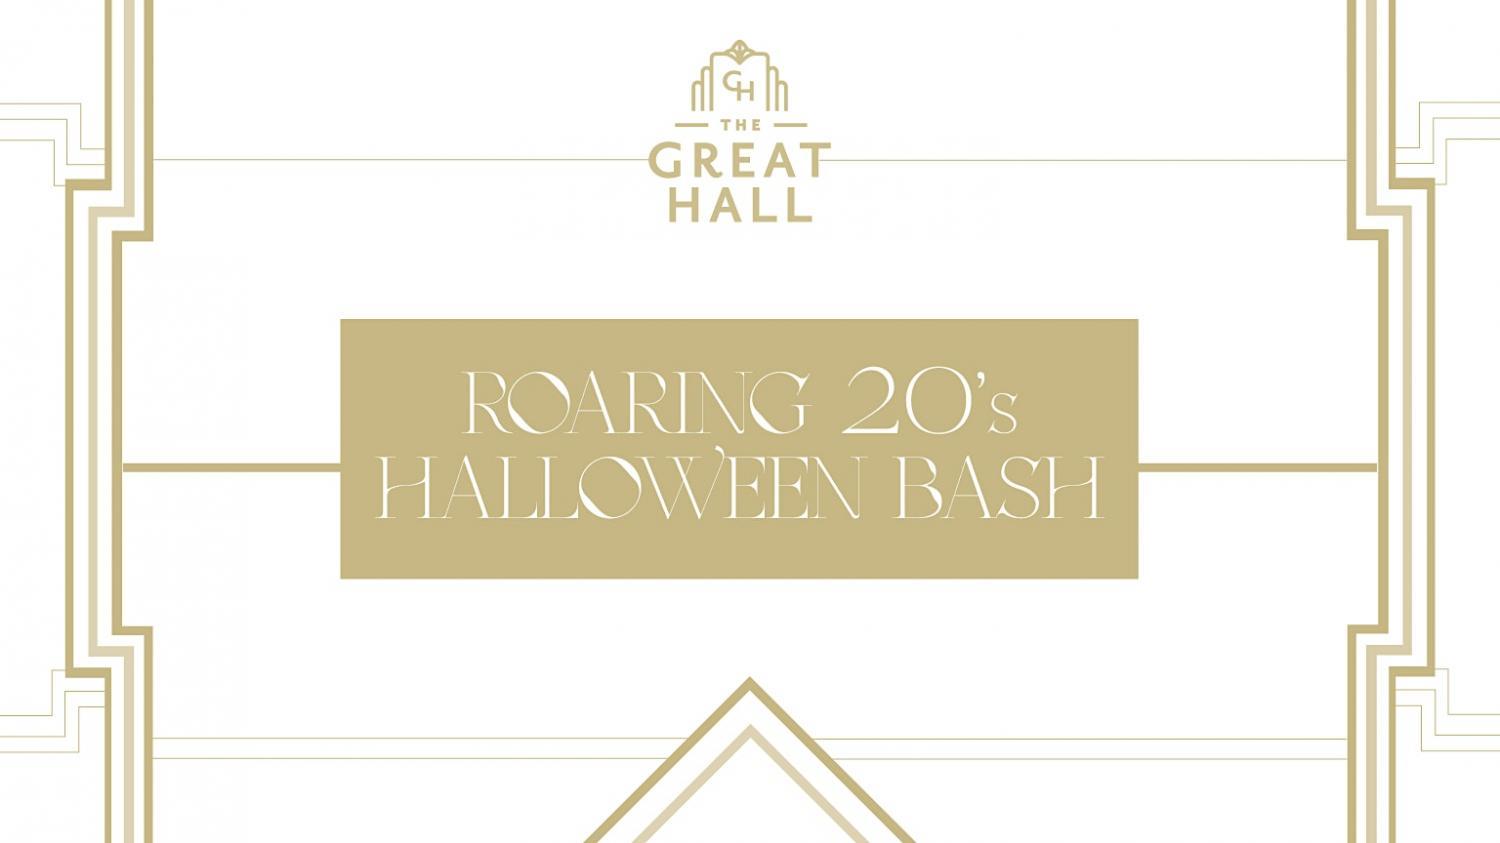 Roaring 20s Halloween Bash - The Great Hall at First National Center
Sat Oct 29, 7:00 PM - Sun Oct 30, 7:00 PM
in 10 days